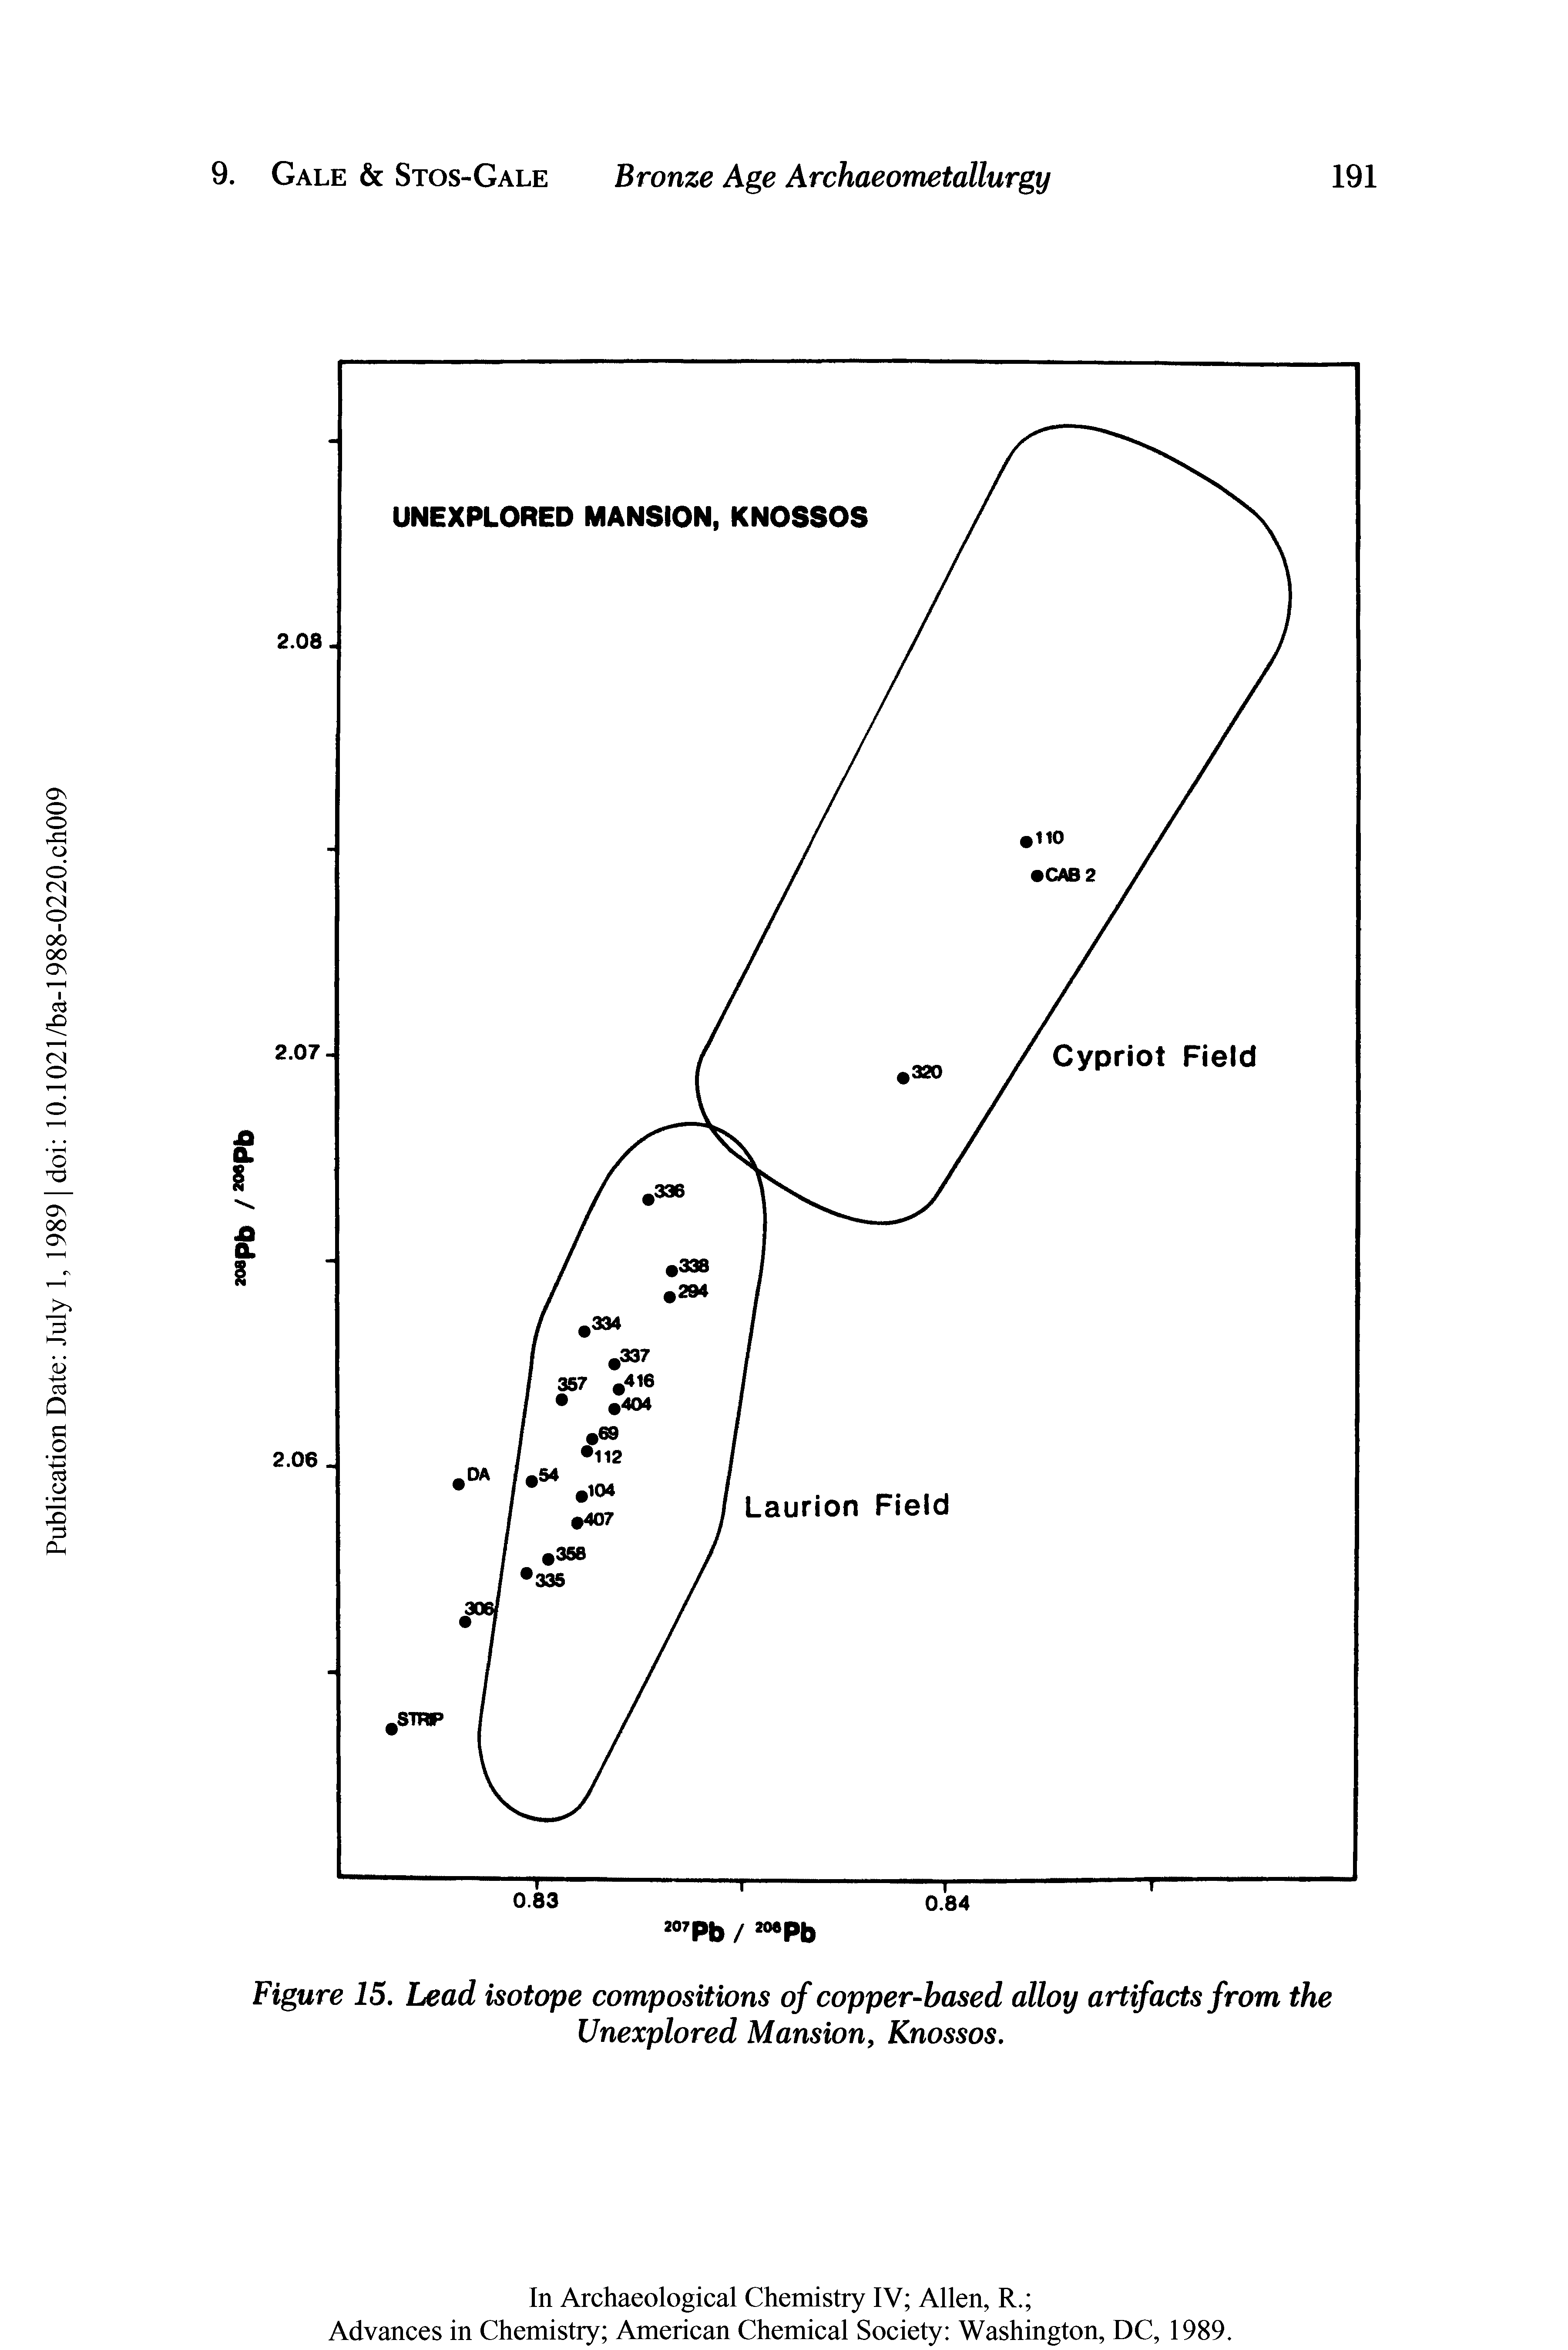 Figure 15. Lead isotope compositions of copper-based alloy artifacts from the Unexplored Mansion, Knossos.